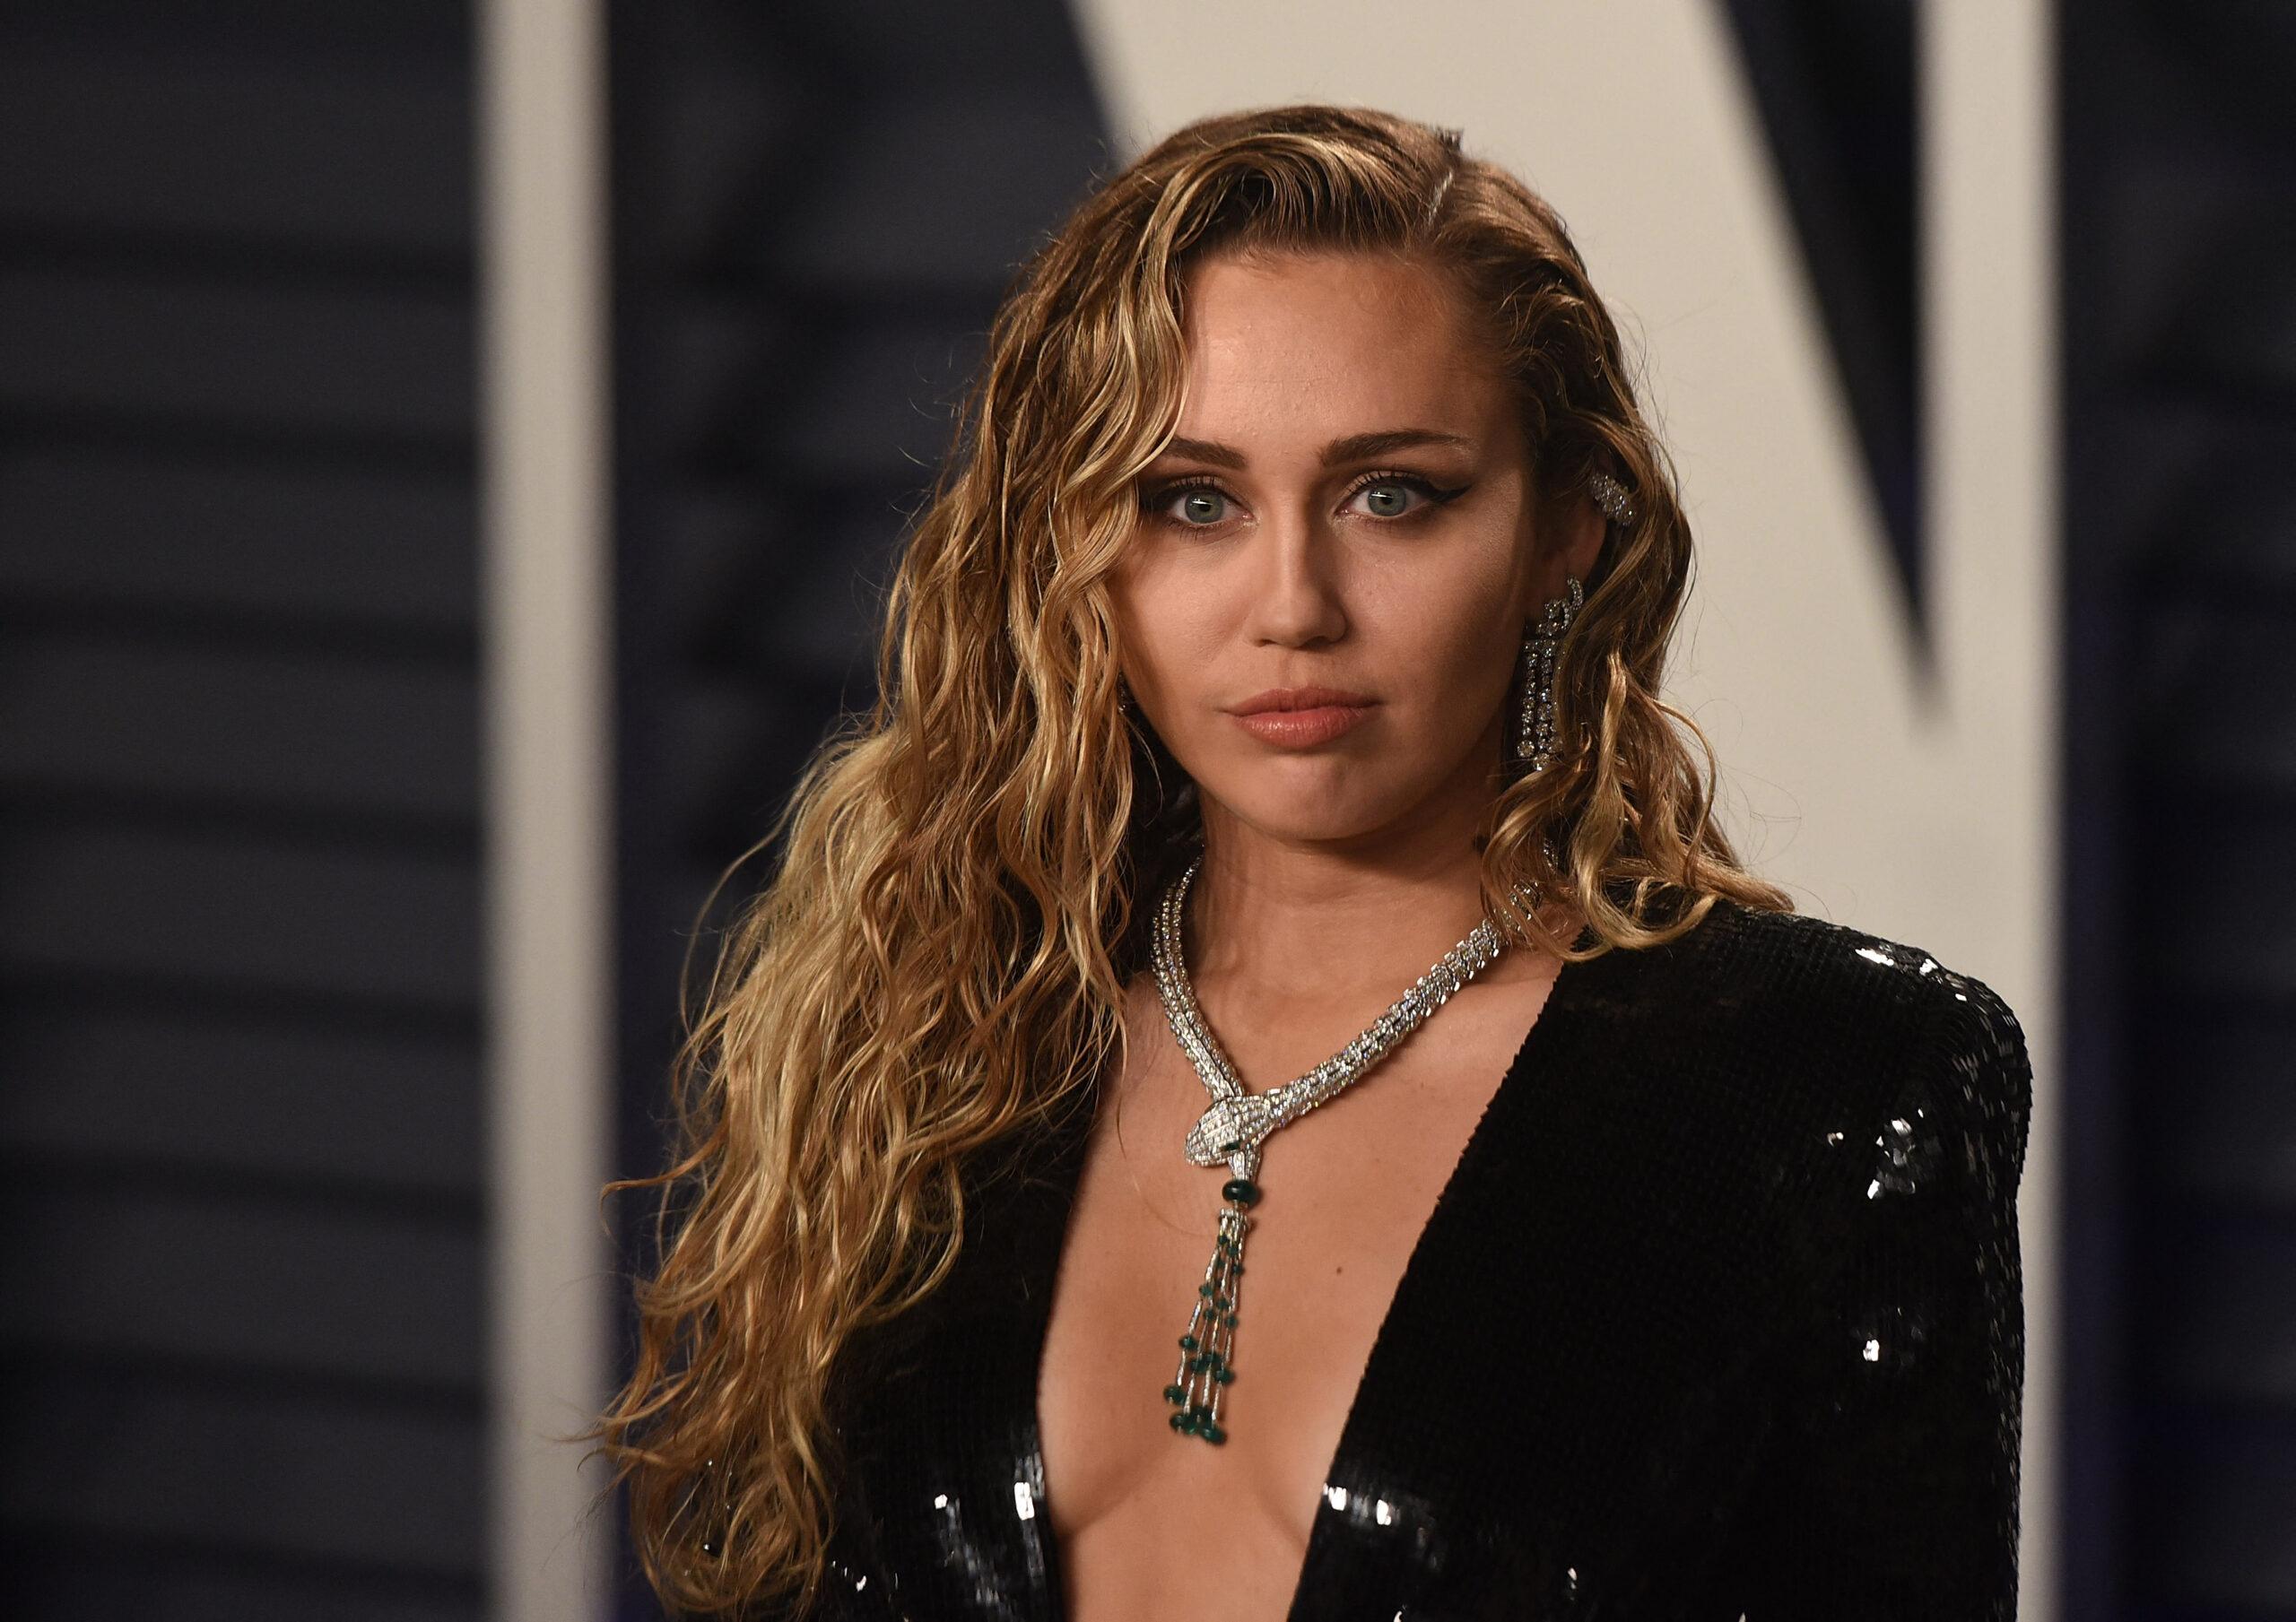 Miley Cyrus poses on the red carpet of Vanity Fair Oscar Party